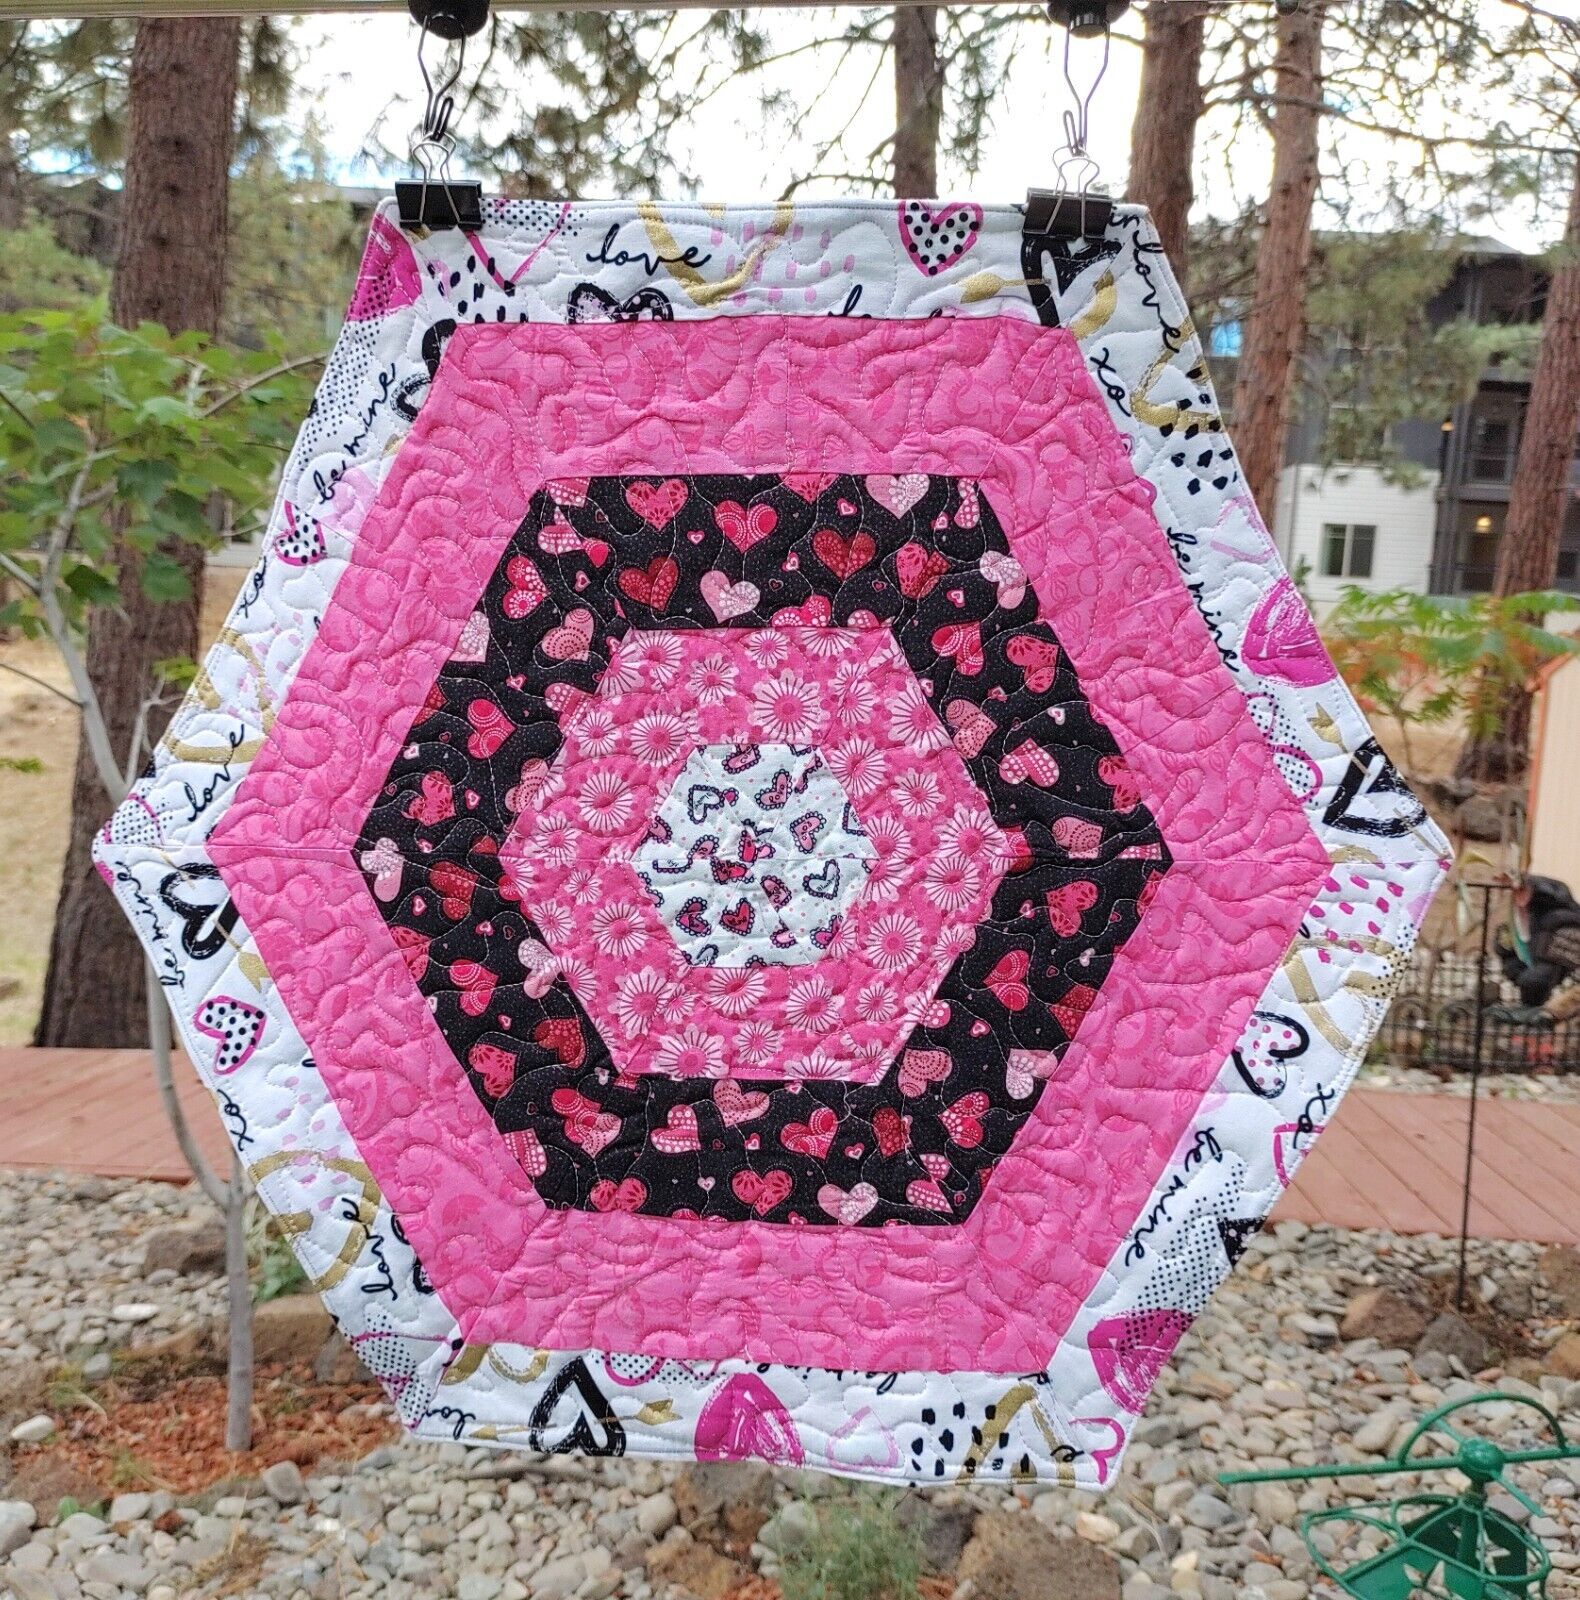 Handmade Quilted Table Topper Hexagon Hearts Valentine's Day Pink St Patrick's